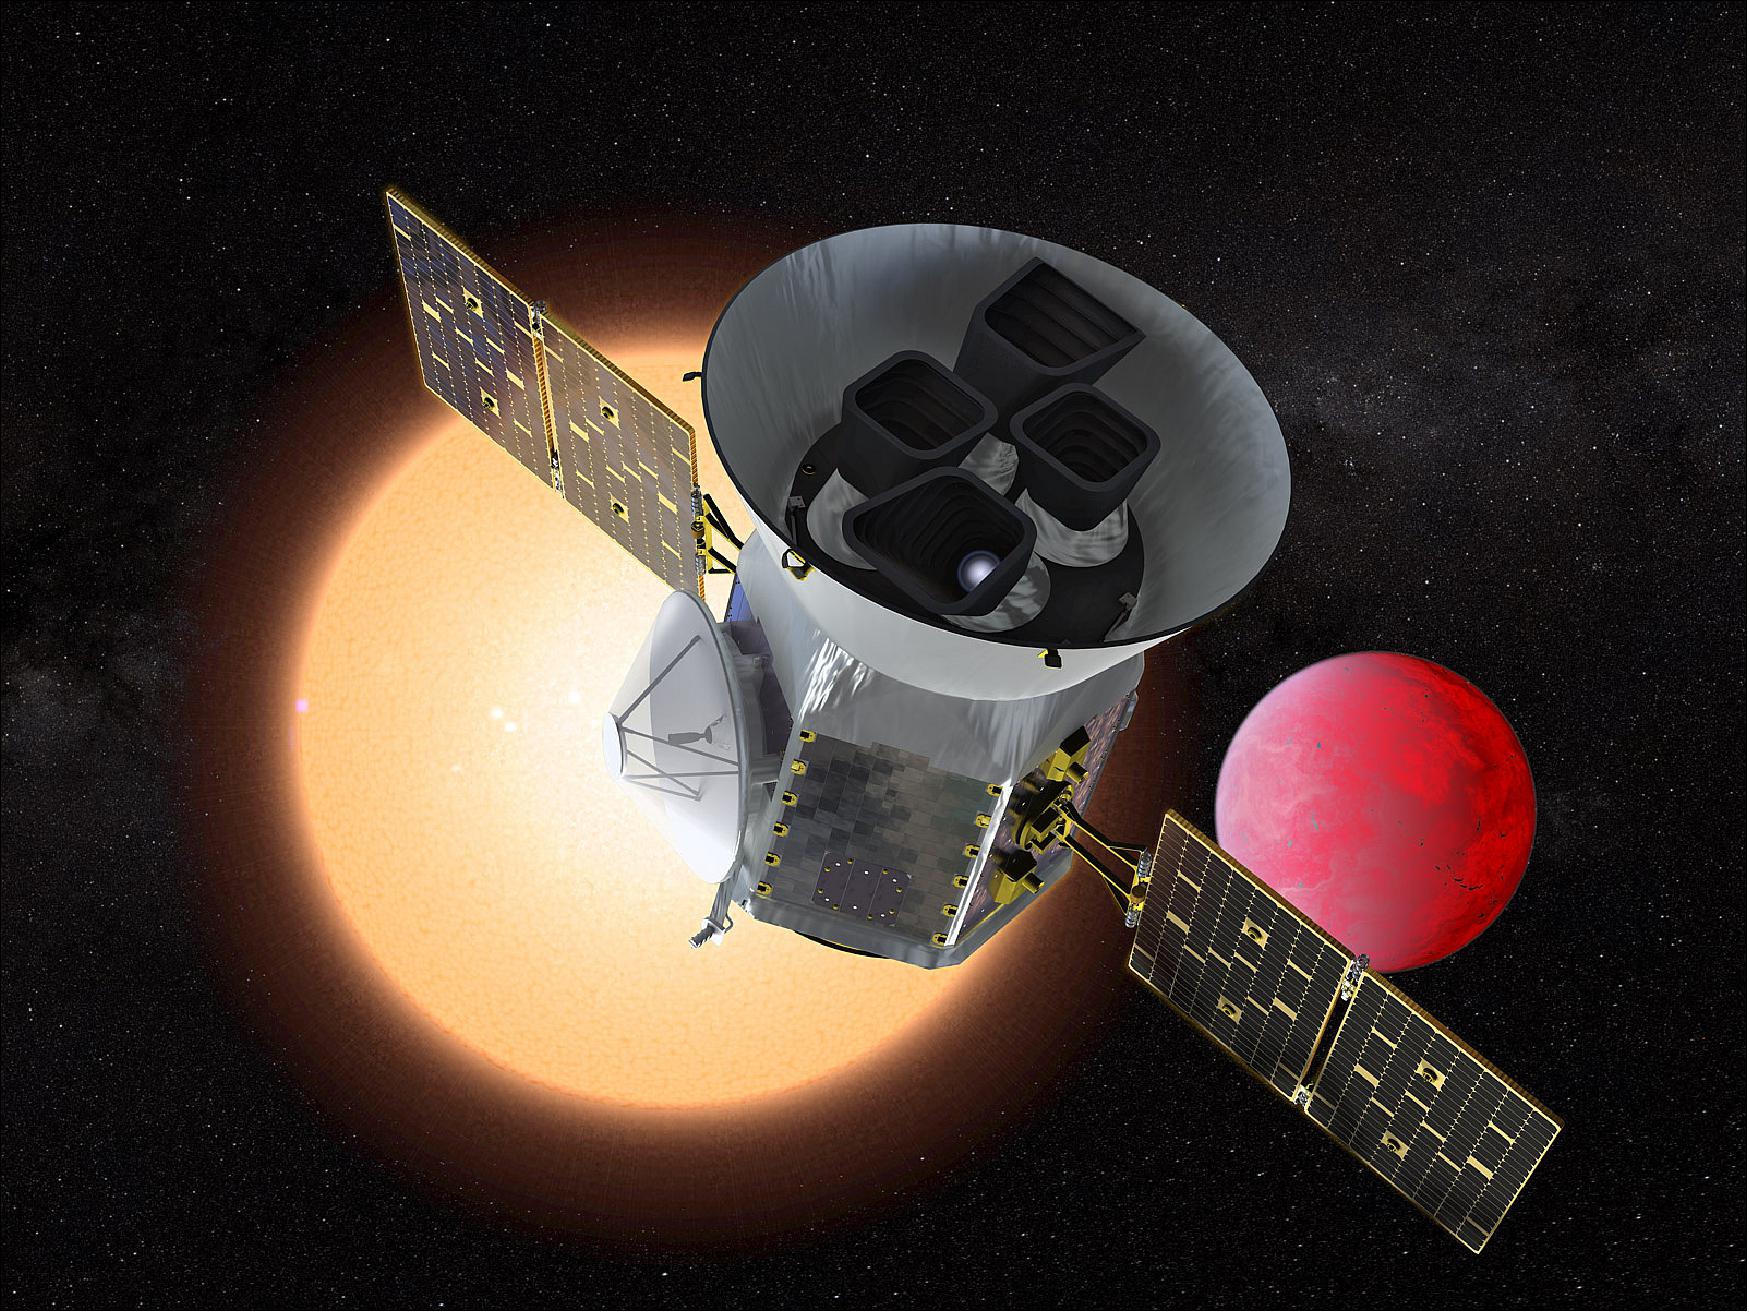 Figure 3: Illustration of the TESS (Transiting Exoplanet Survey Telescope) in front of a lava planet orbiting its host star. TESS will identify thousands of potential new planets for further study and observation (image credit: NASA/GSFC) 6)